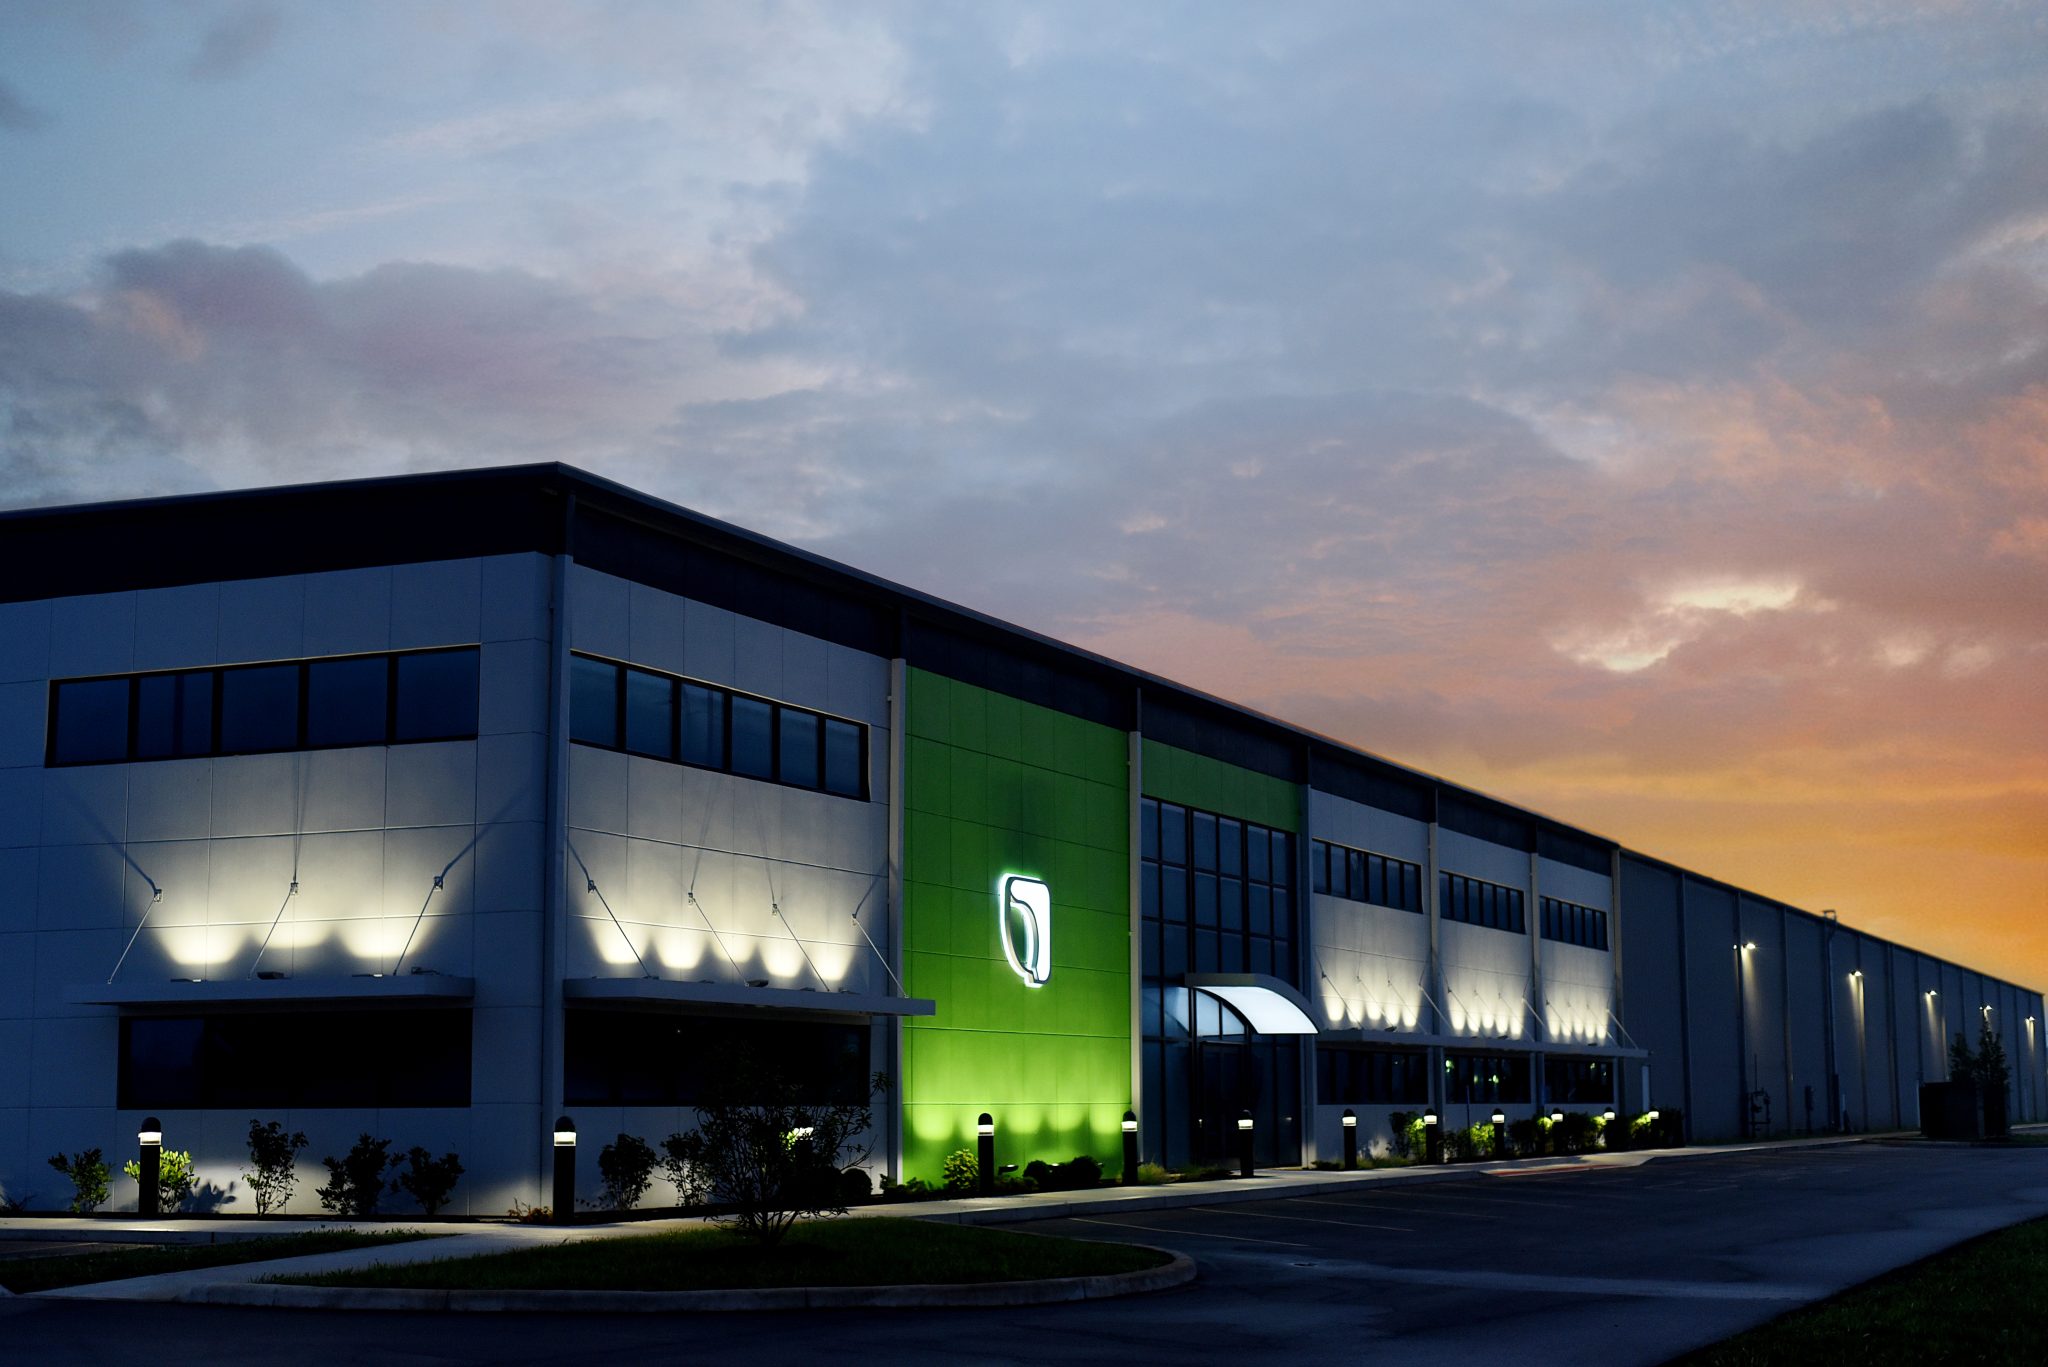 Exterior shot of Genesis Products building at dusk